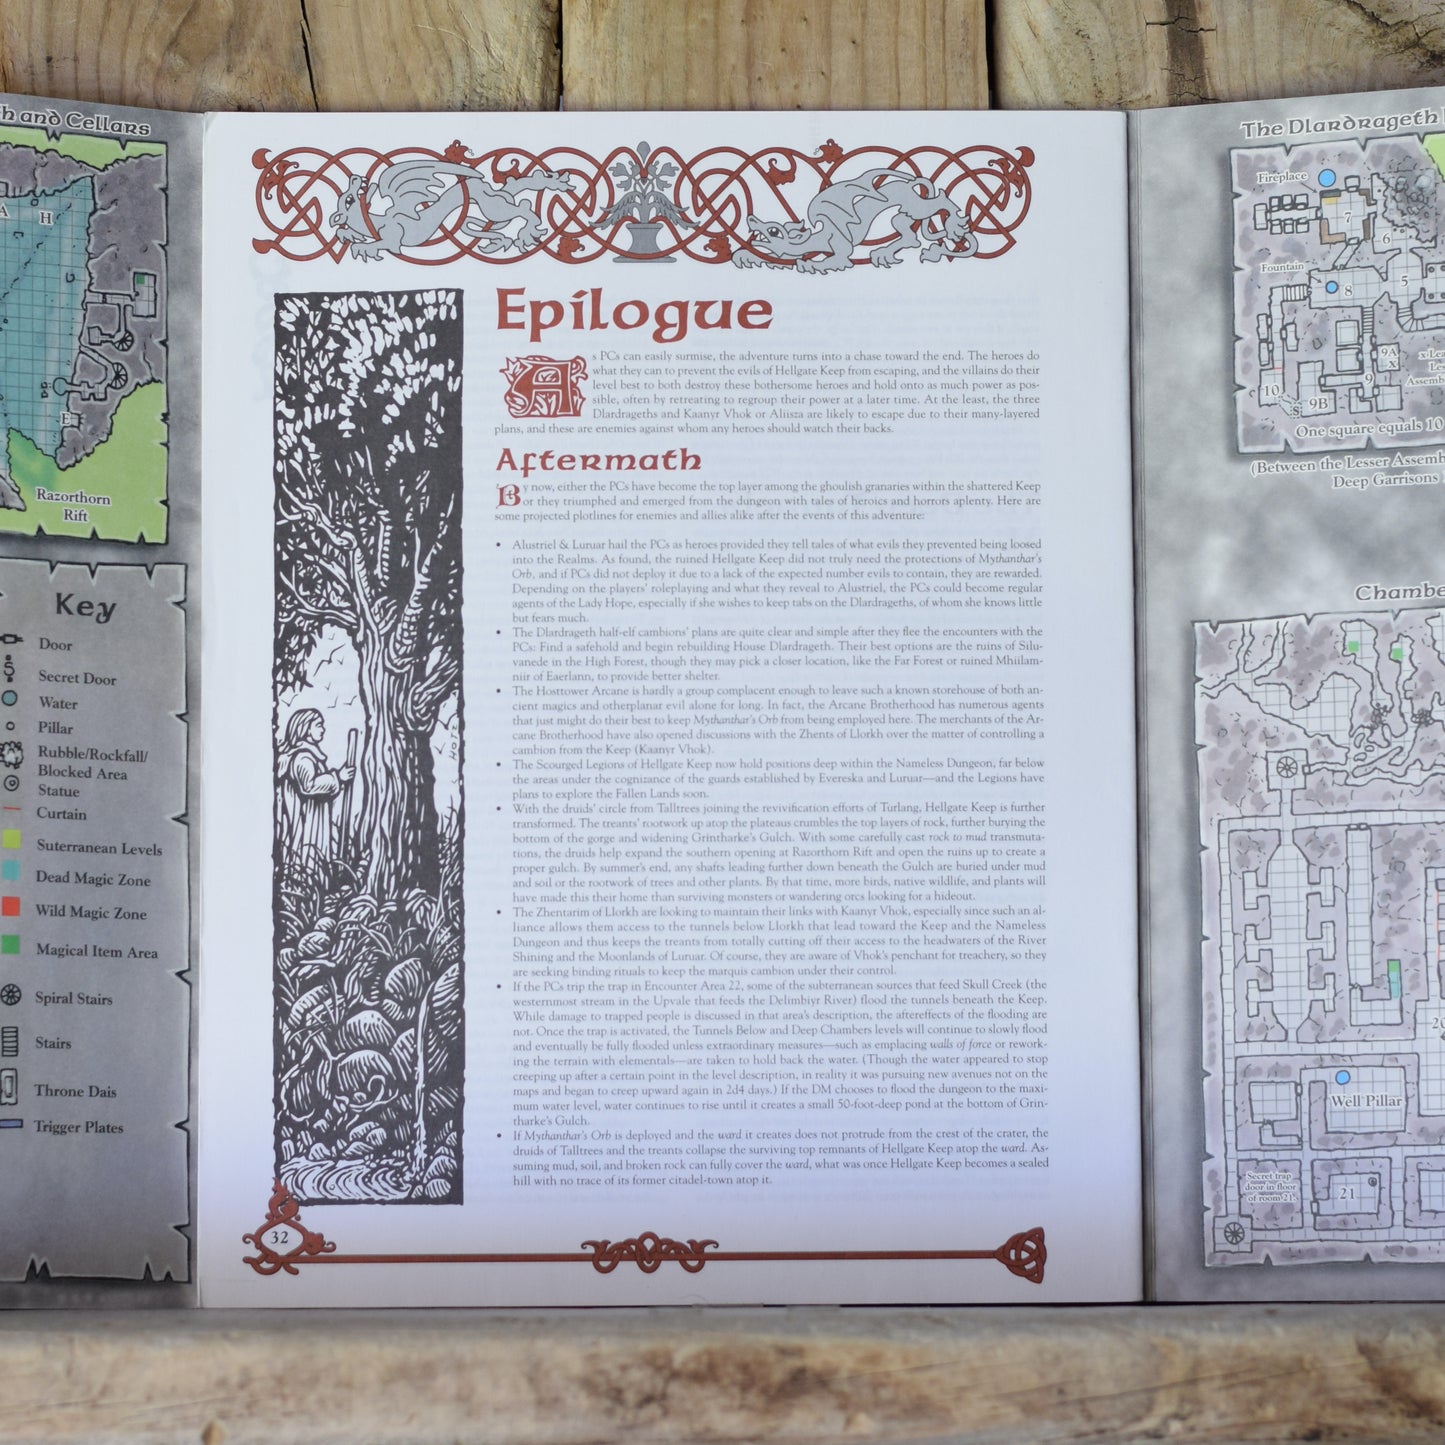 Vintage Dungeons and Dragons RPG Book: AD&D Forgotten Realms - Hellgate Keep Official Adventure